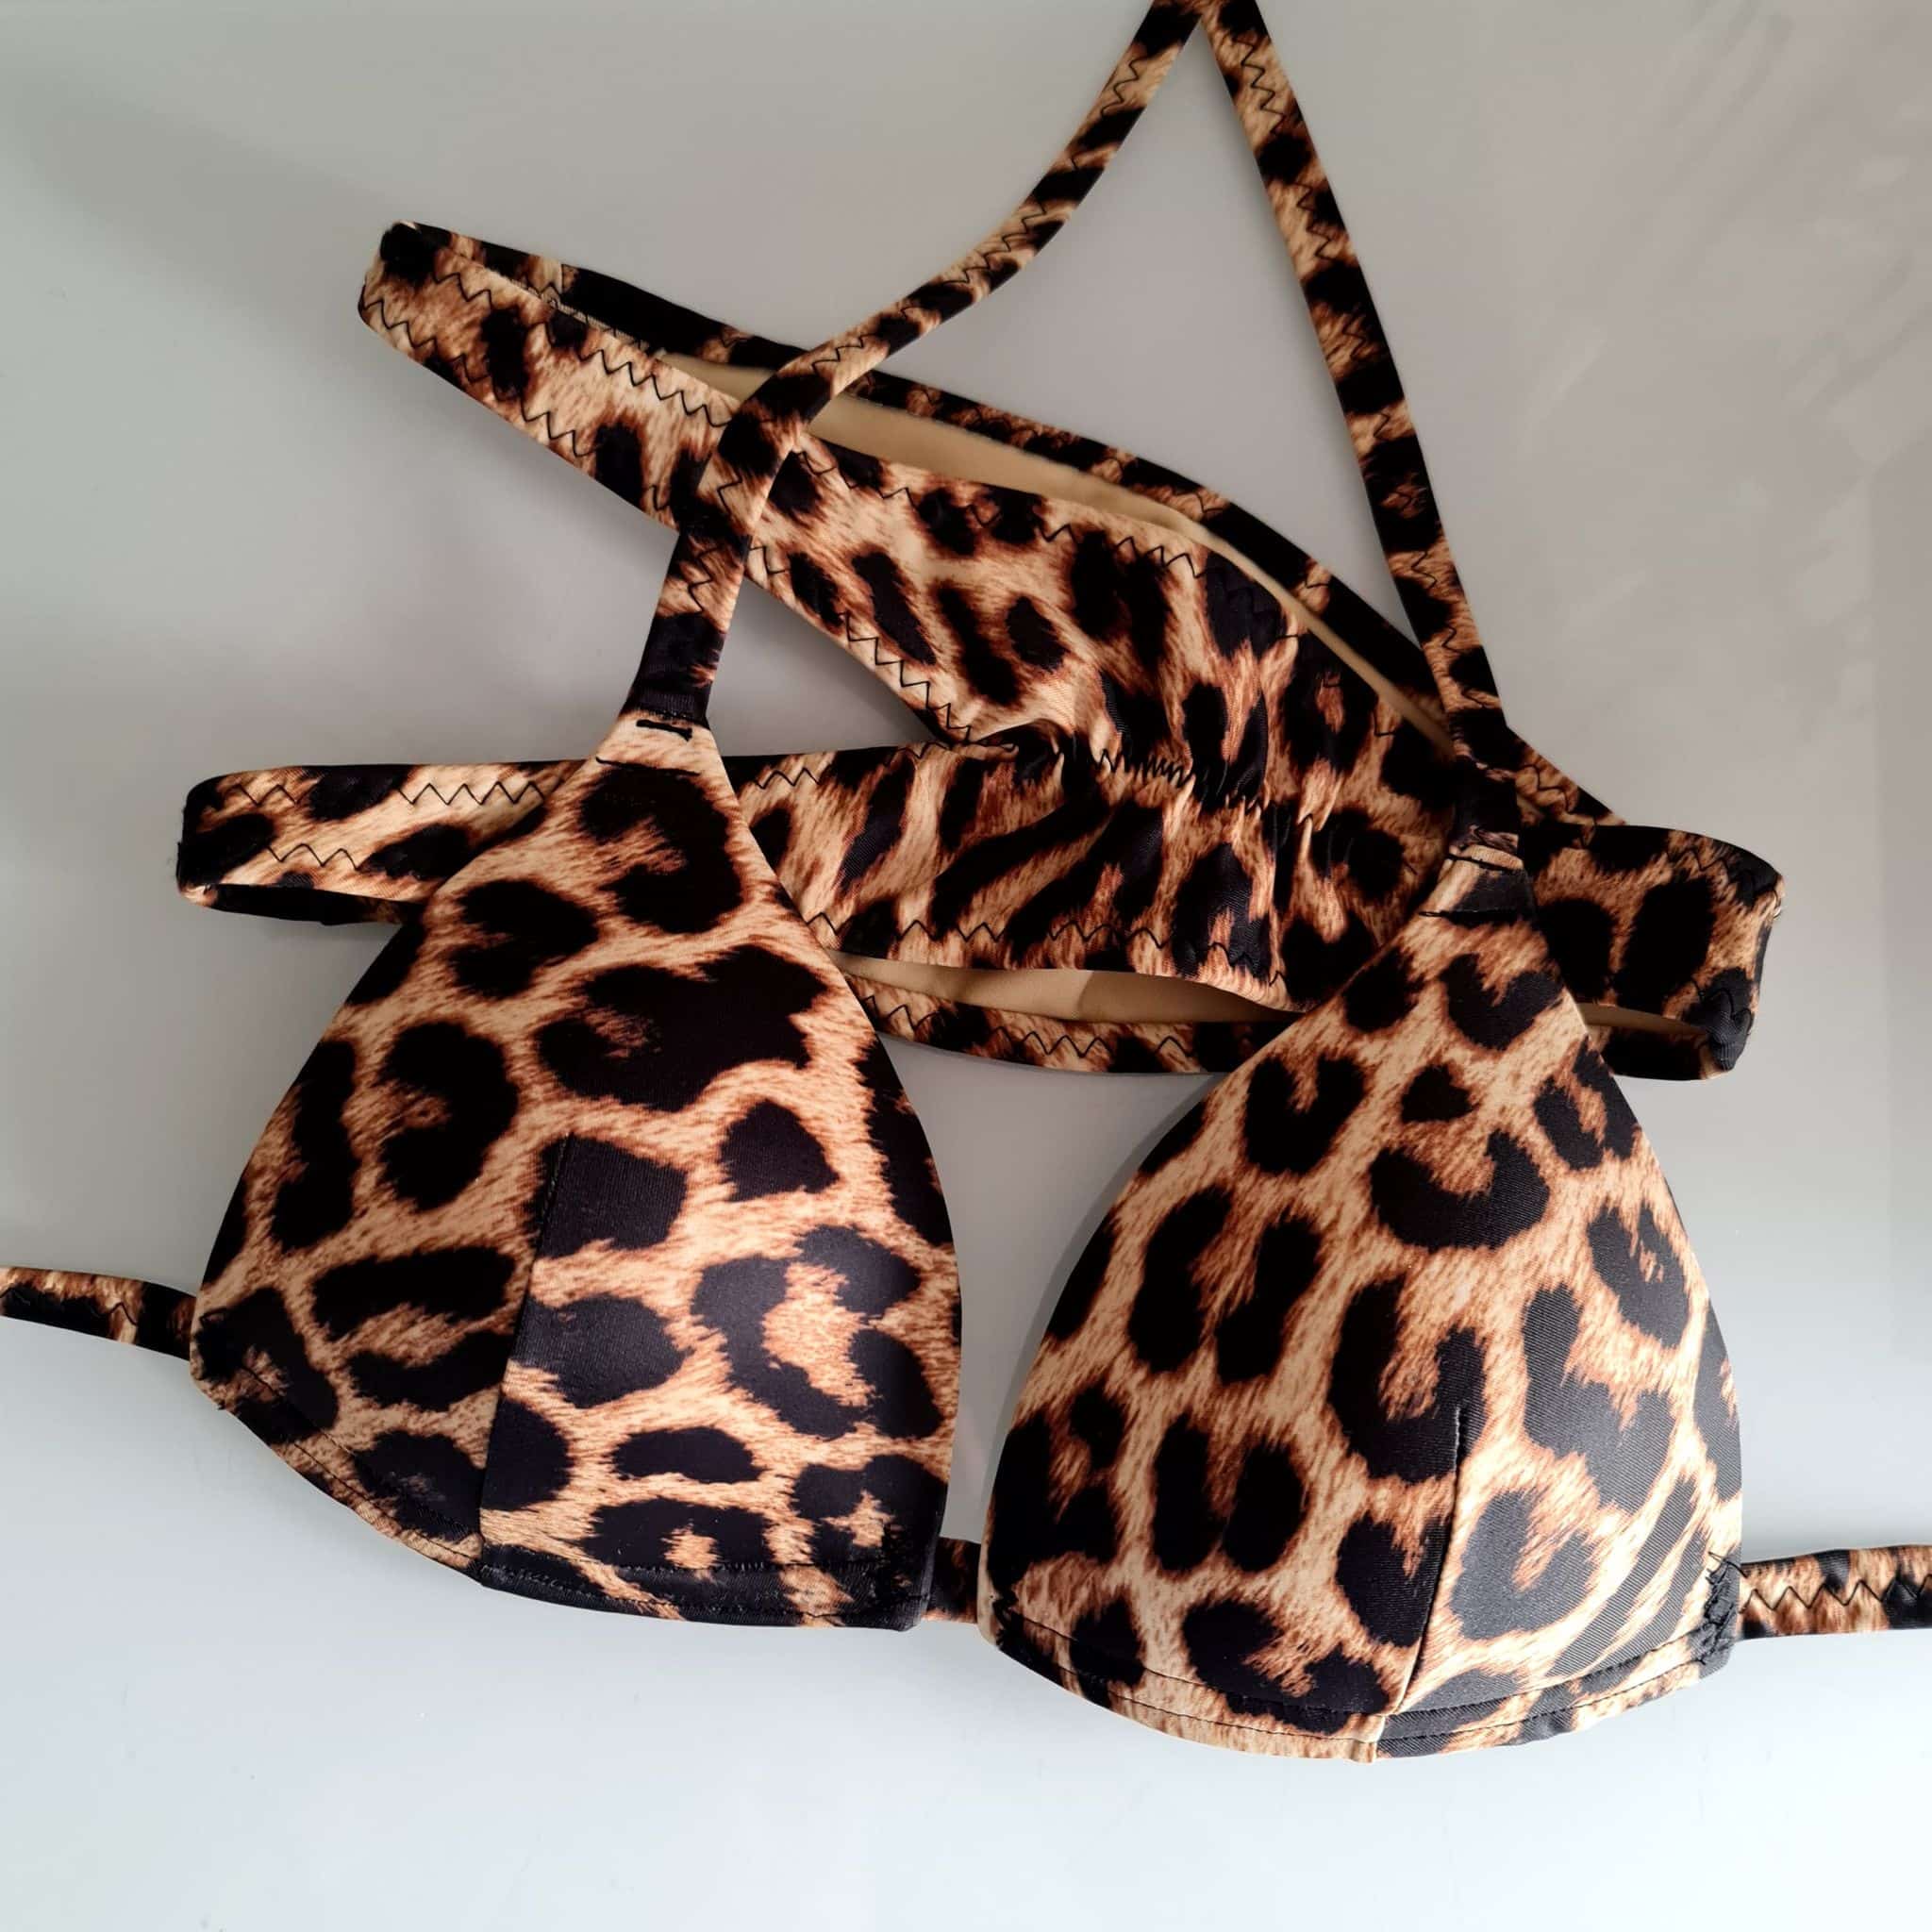 Push Up Bras, Competition Stage Posing Suit, Price from £100